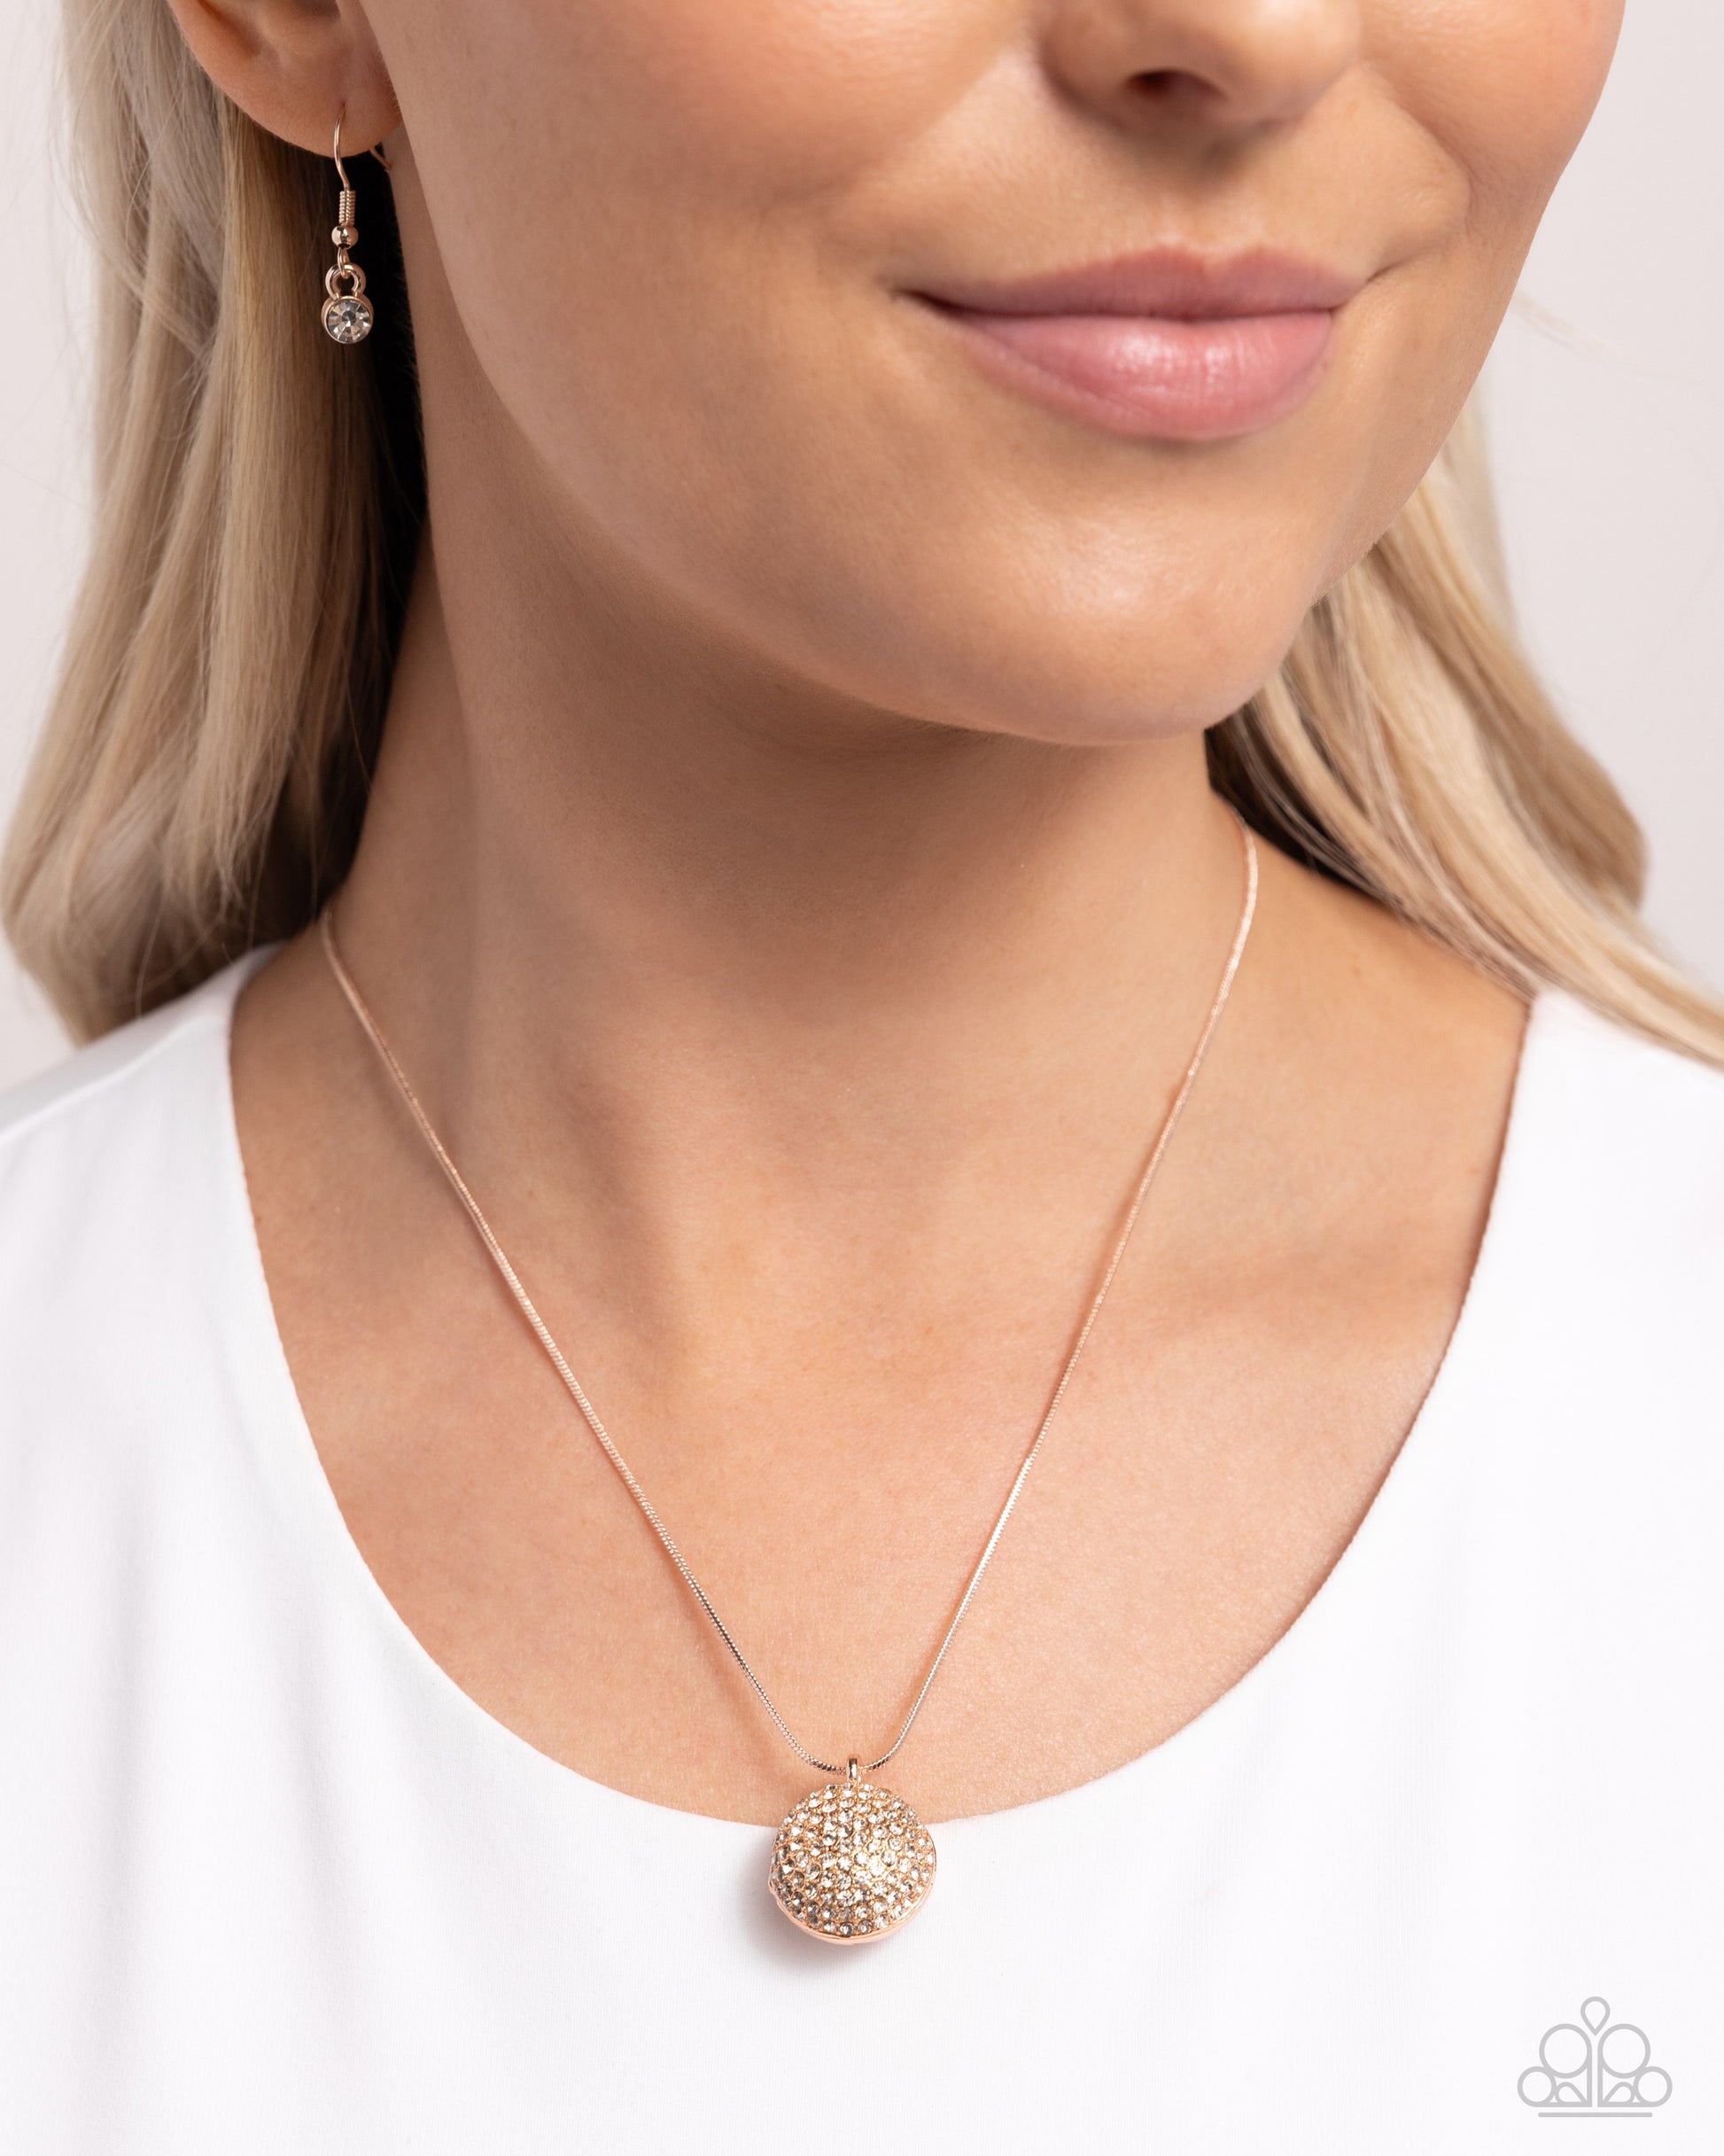 Paparazzi Accessories - Bedazzled Bravado - Rose Gold Necklaces&nbsp; in shimmery white rhinestones, a rose gold ornament-like sphere glides along a rose gold snake chain for a dazzling basic. Features an adjustable clasp closure.  Sold as one individual necklace. Includes one pair of matching earrings.